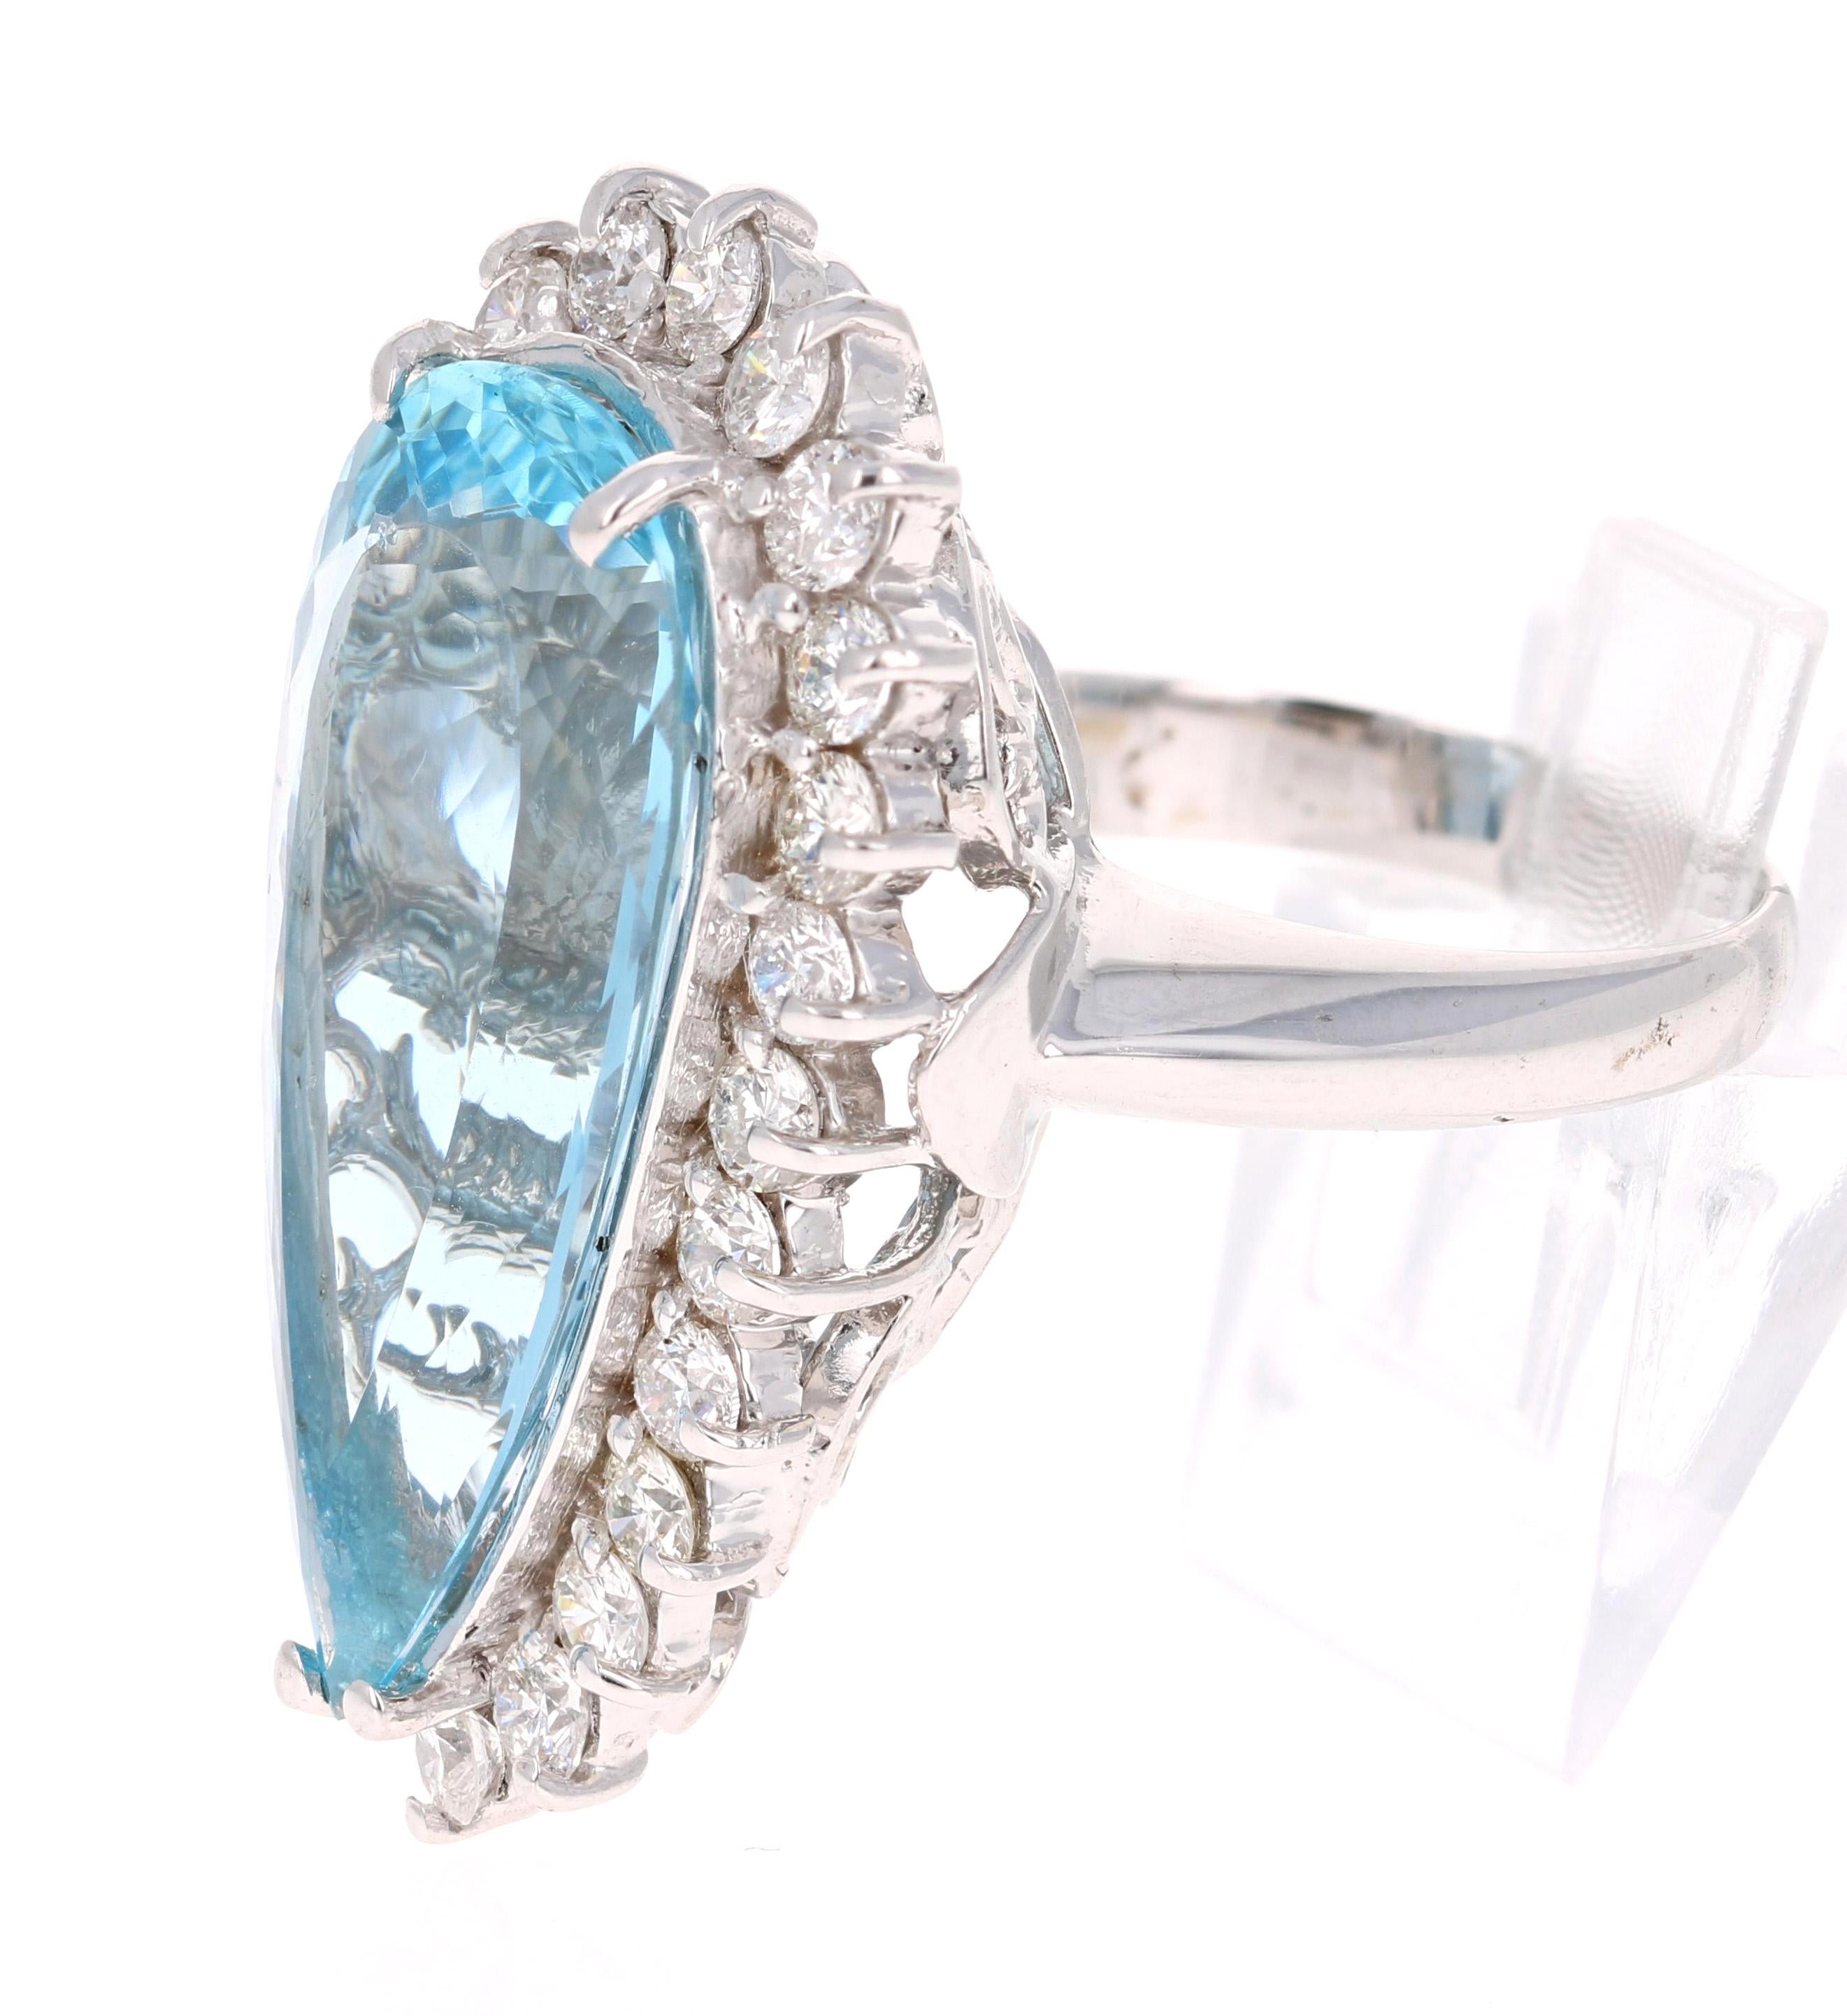 Stunning masterpiece!!!! 
This ring has a GORGEOUS 12.82 carat Pear Cut Aquamarine set in the center of the ring and is surrounded by 24 Round Cut Diamonds that weigh 1.95 carat (Clarity: SI2, Color: F). The total carat weight of this ring is 14.77